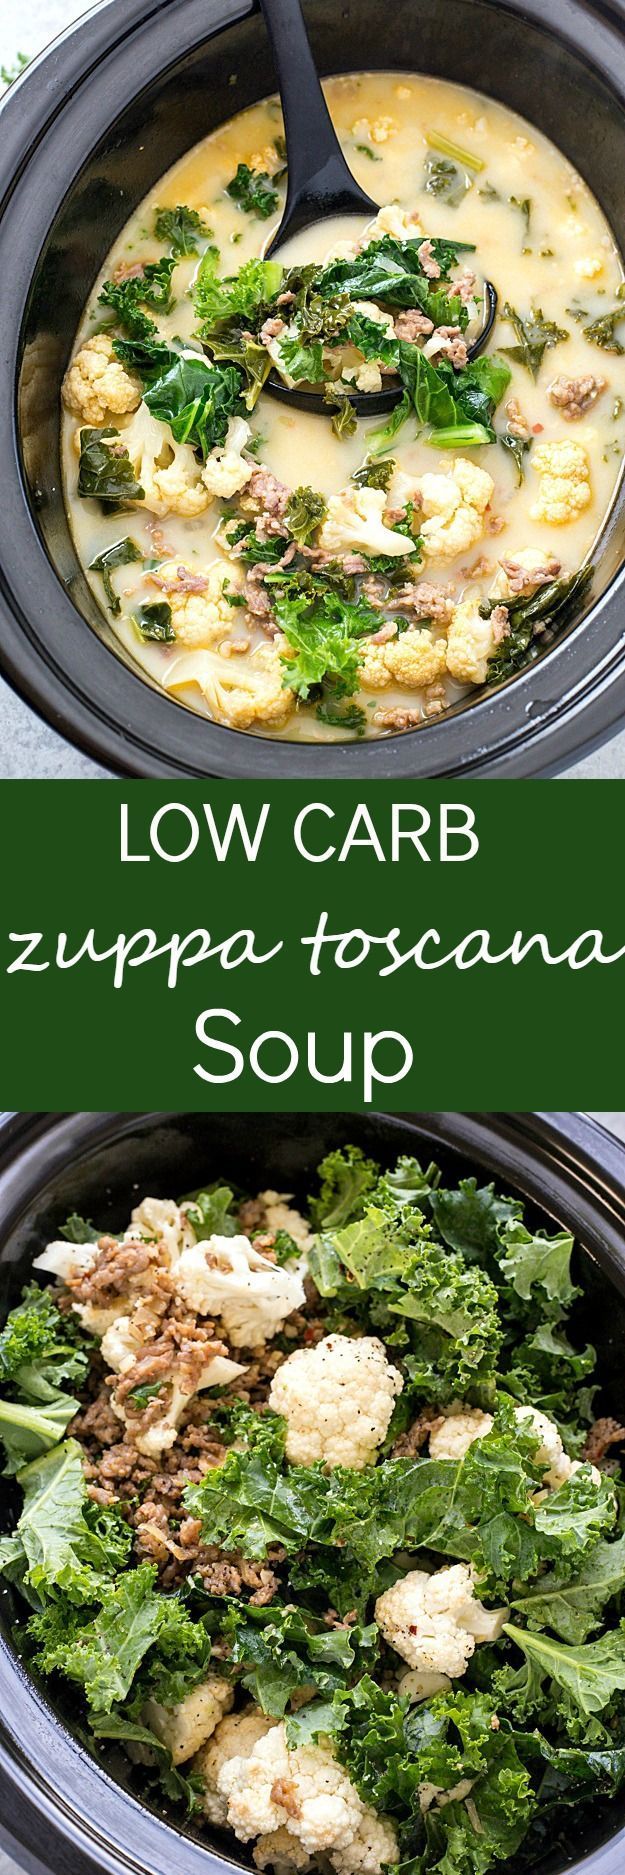 Slow Cooker Low Carb Zuppa Toscana Soup – Skip the trip to your local restaurant and make a batch of this insanely delicious